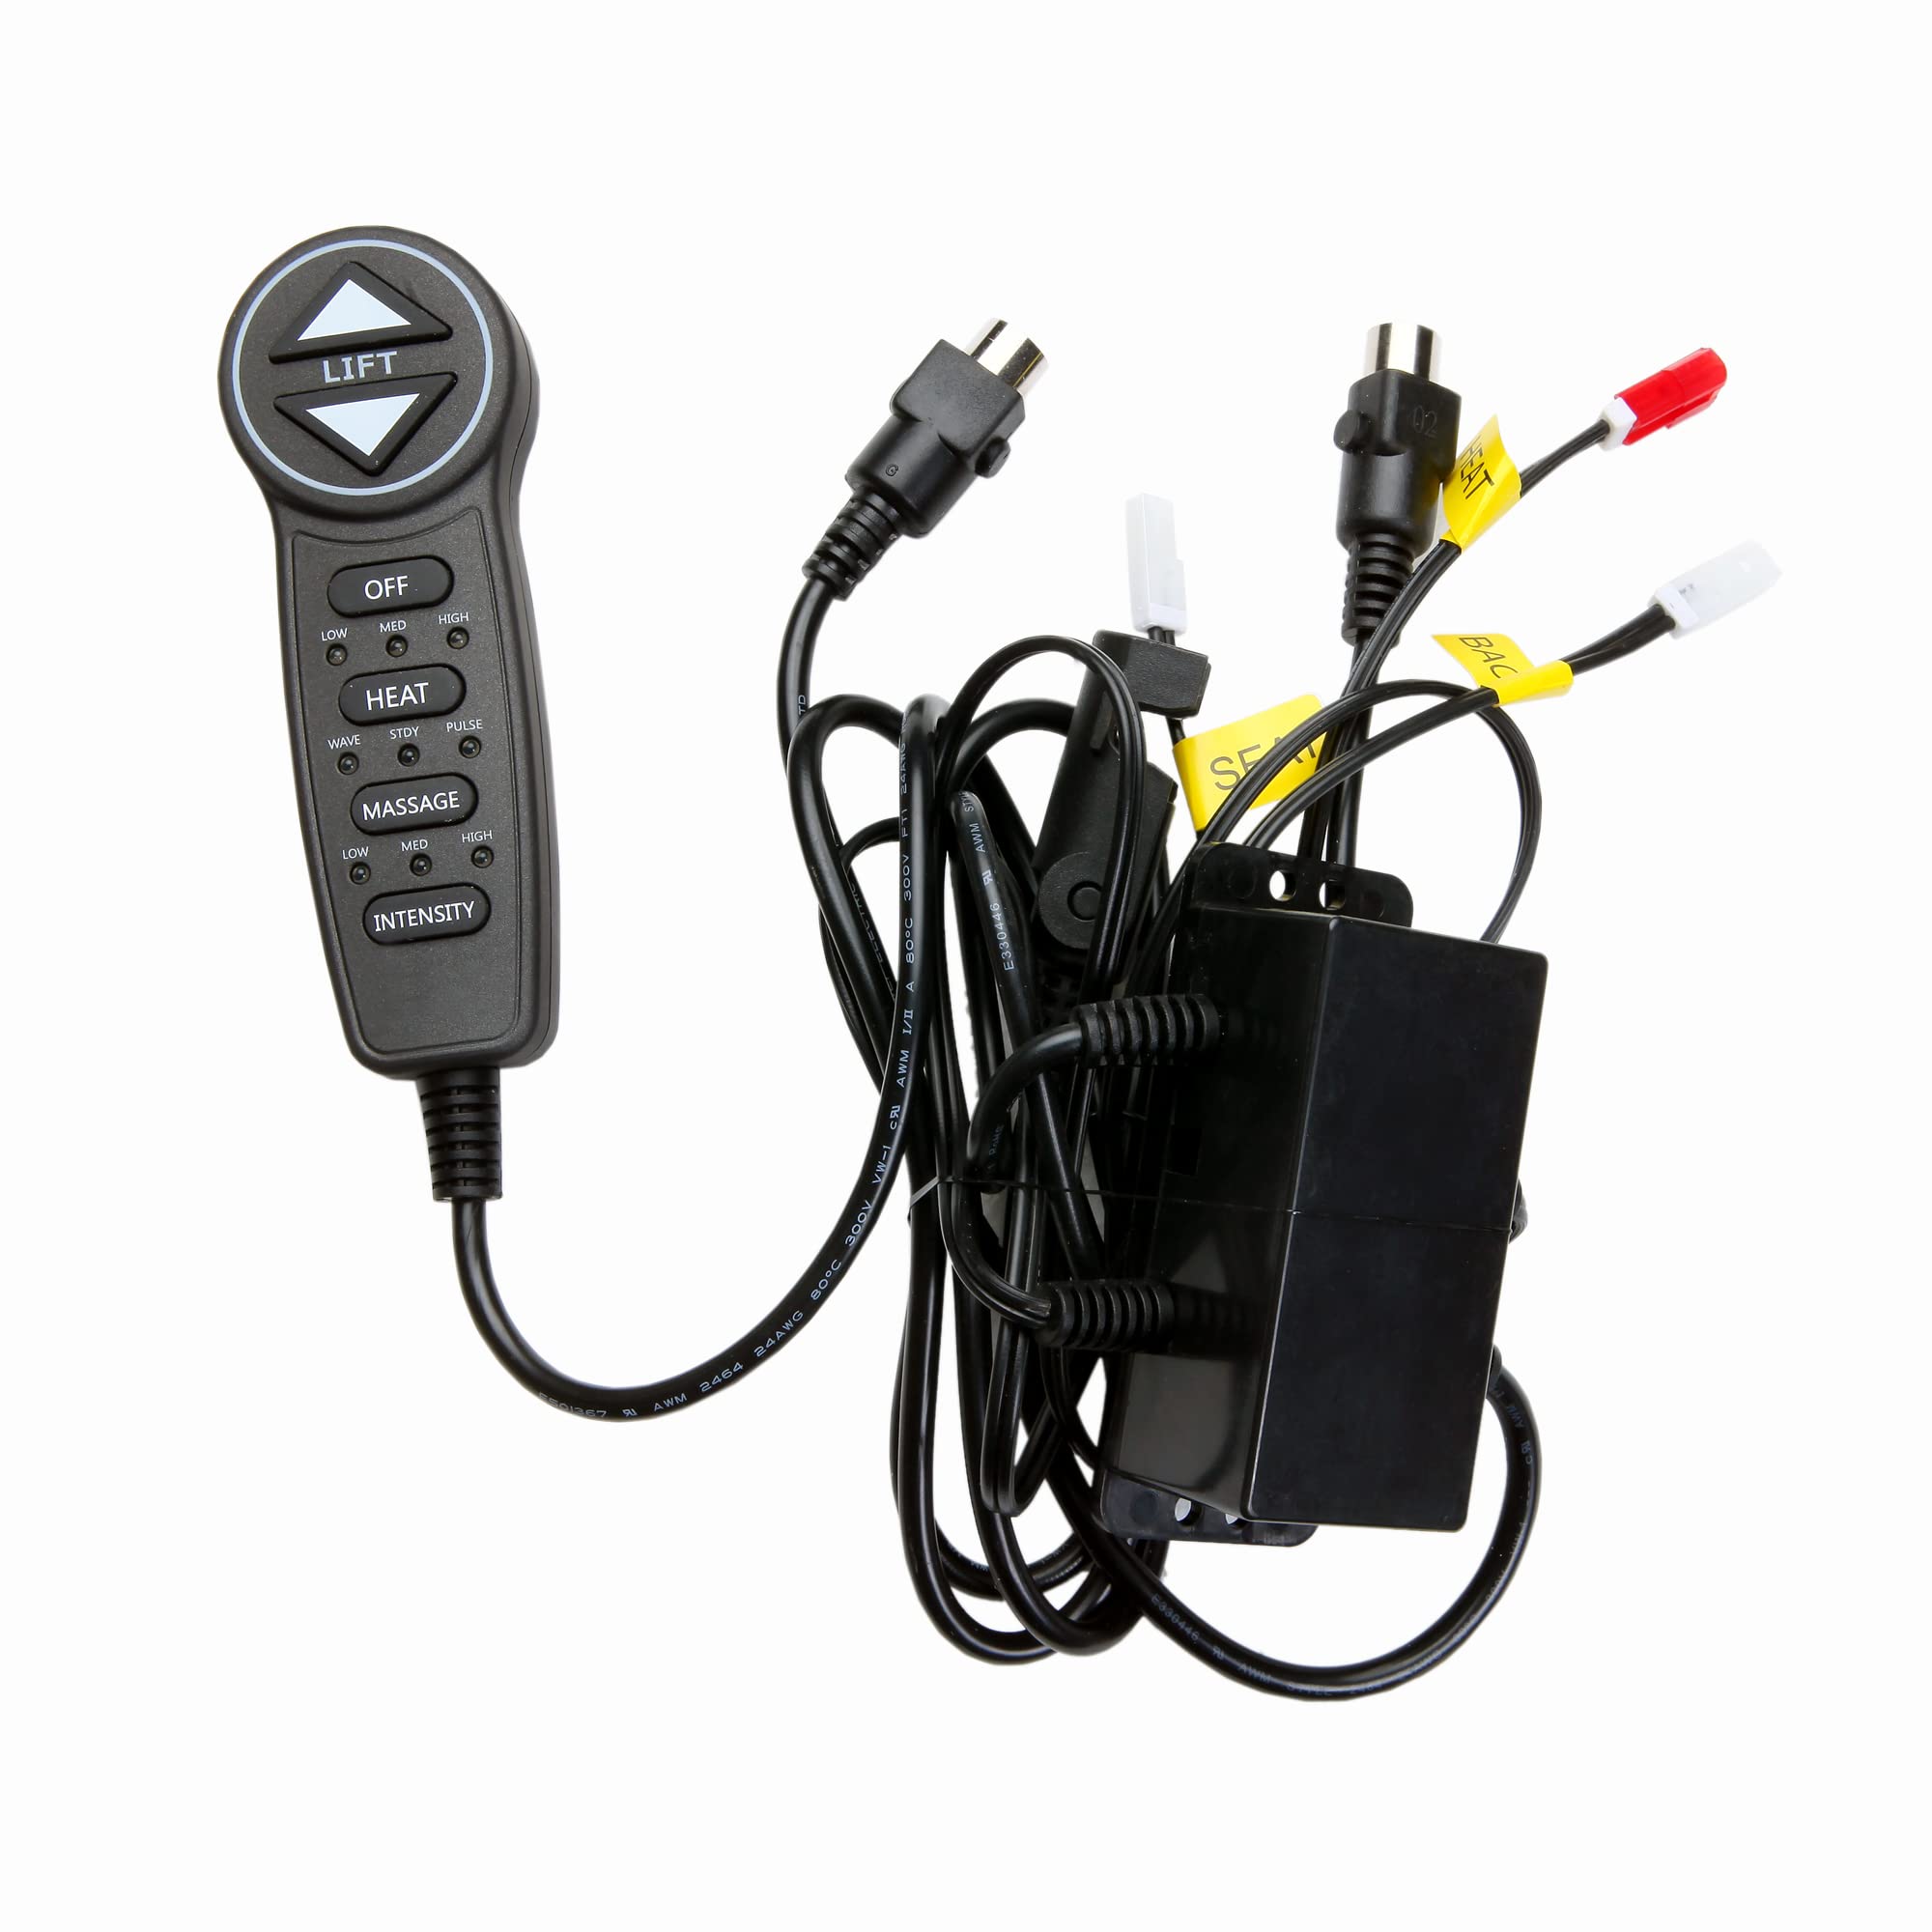 Fruhdi 5 Pin Prong MLSK55- A1 Hand Control Handset Remote with USB Heat and Massage for Lift Chairs Power Recliners